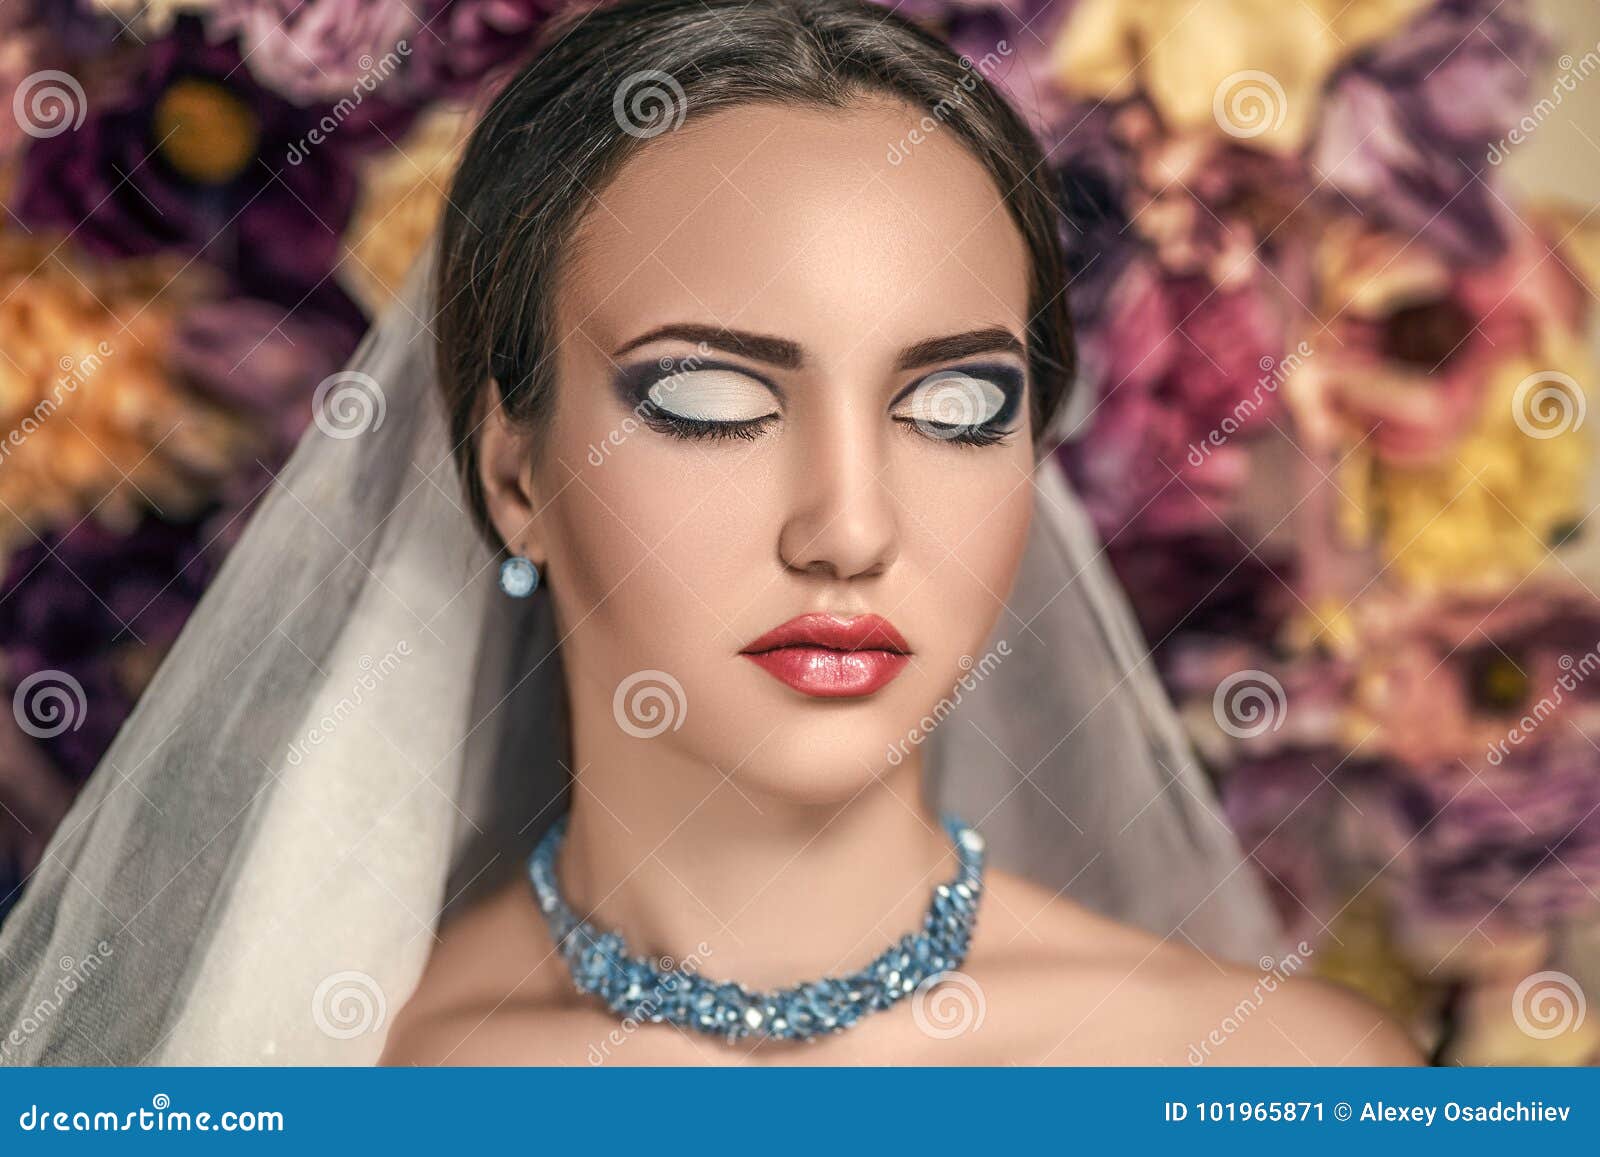 Style woman makeup stock image. Image of face, look - 101965871